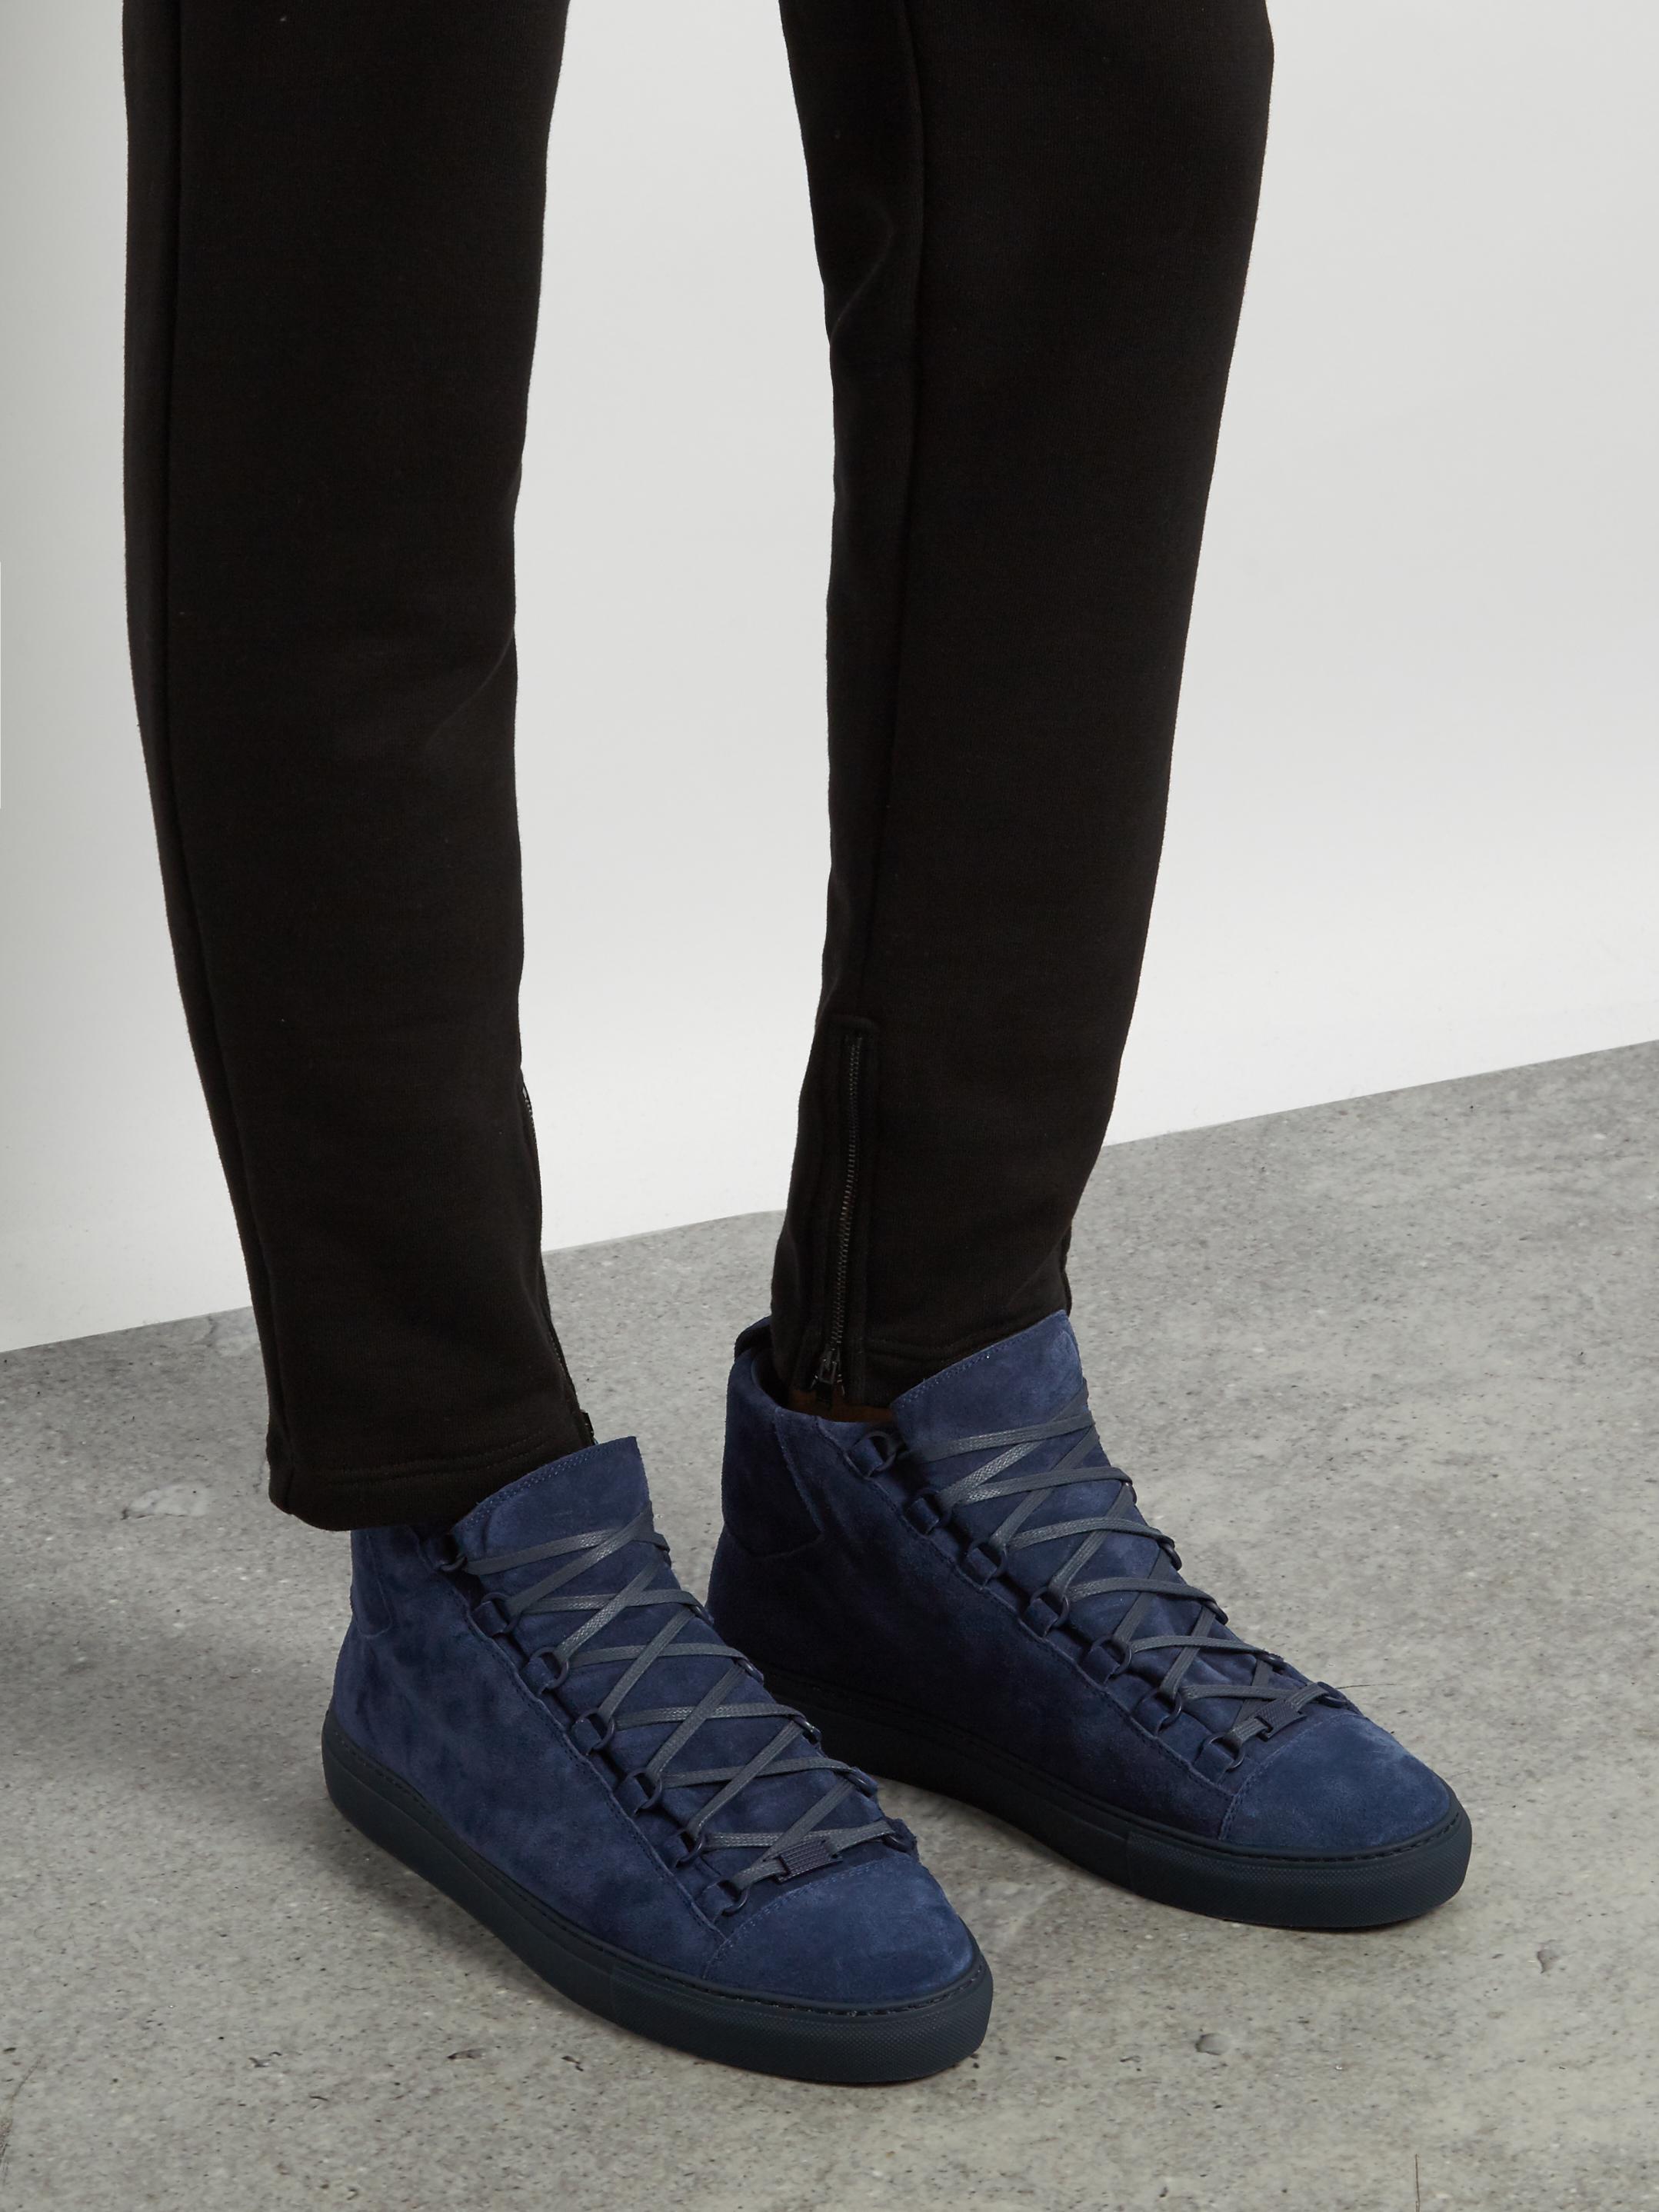 Balenciaga Arena High-top Suede Trainers in Blue for Men - Lyst